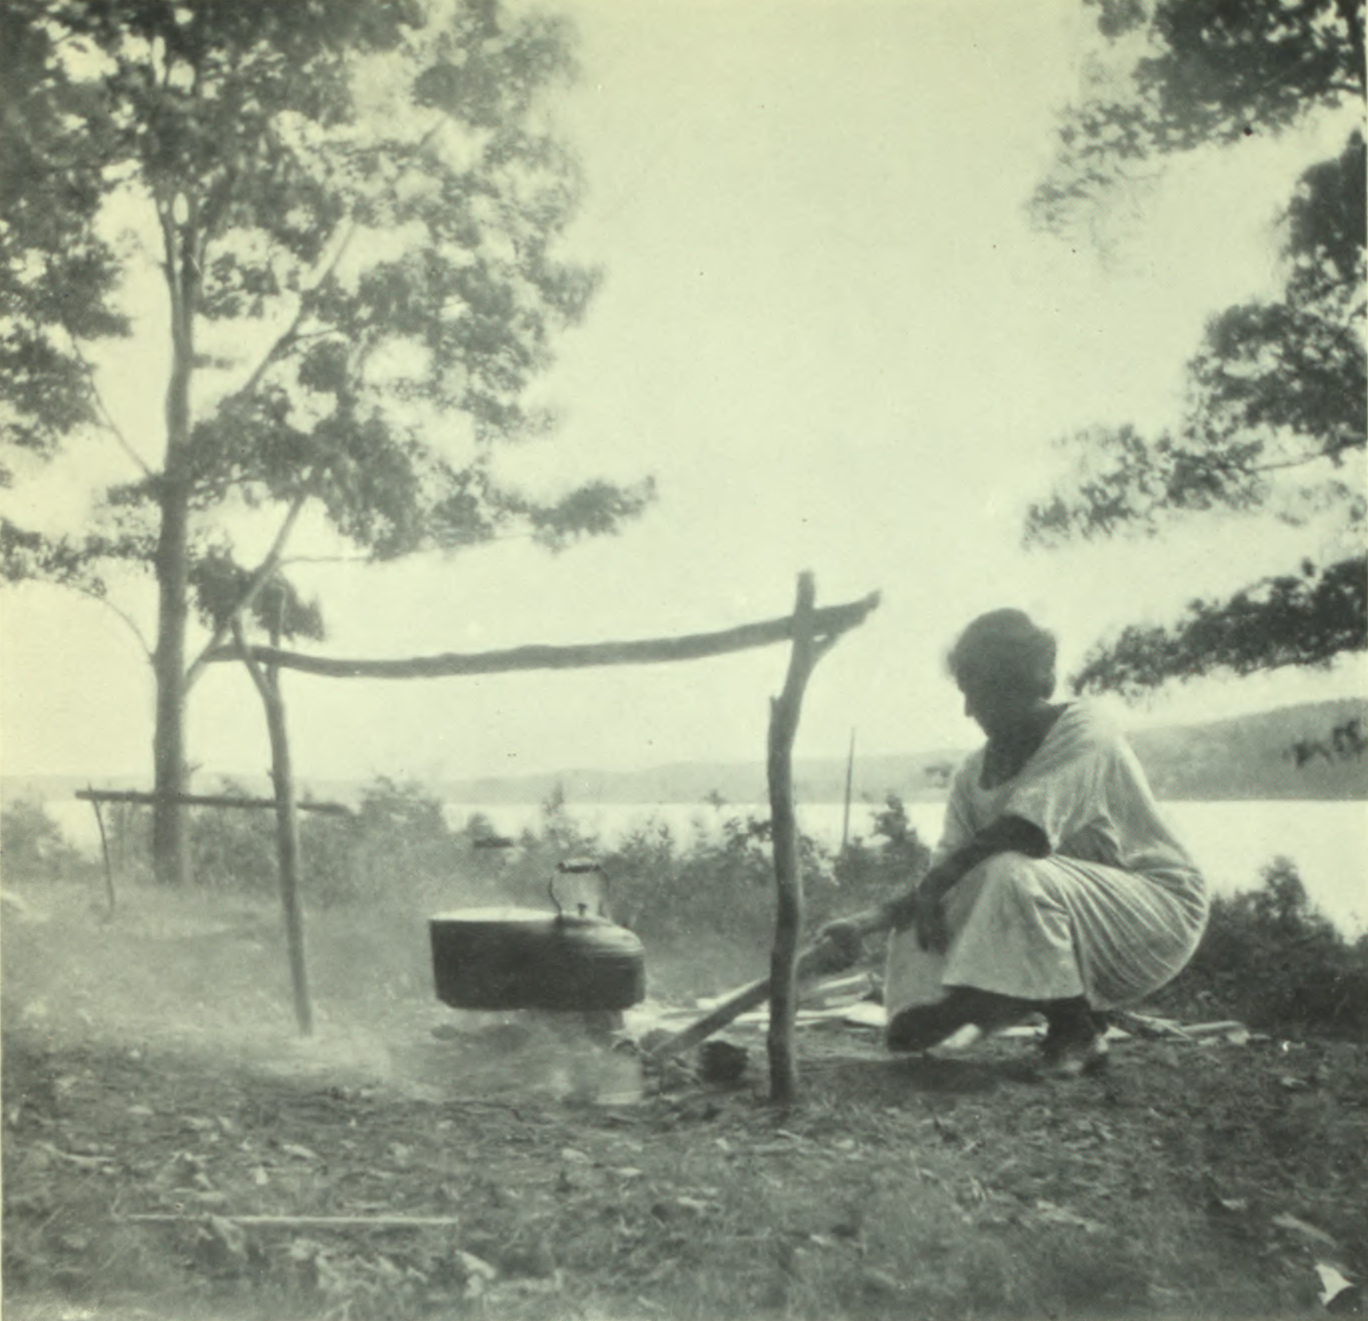 Woman tending to a cooking fire and food.